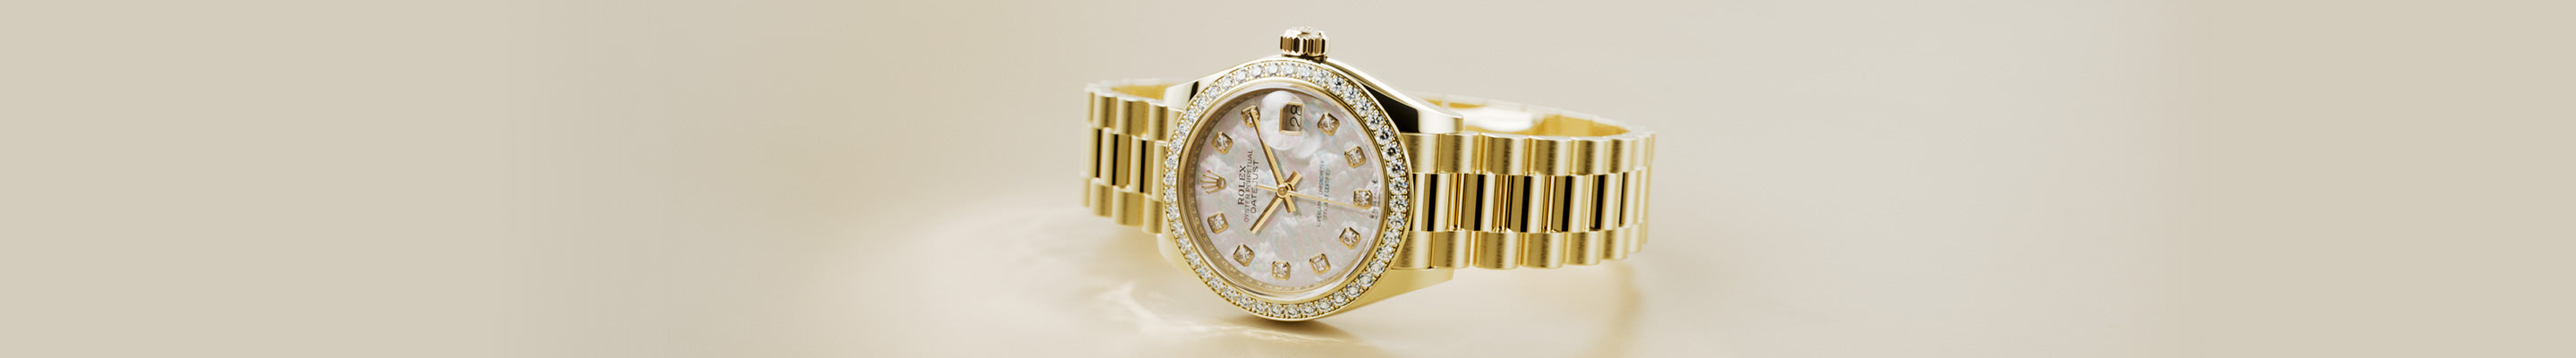 Rolex Lady-Datejust on Side in Yellow Gold at Fink's Jewelers